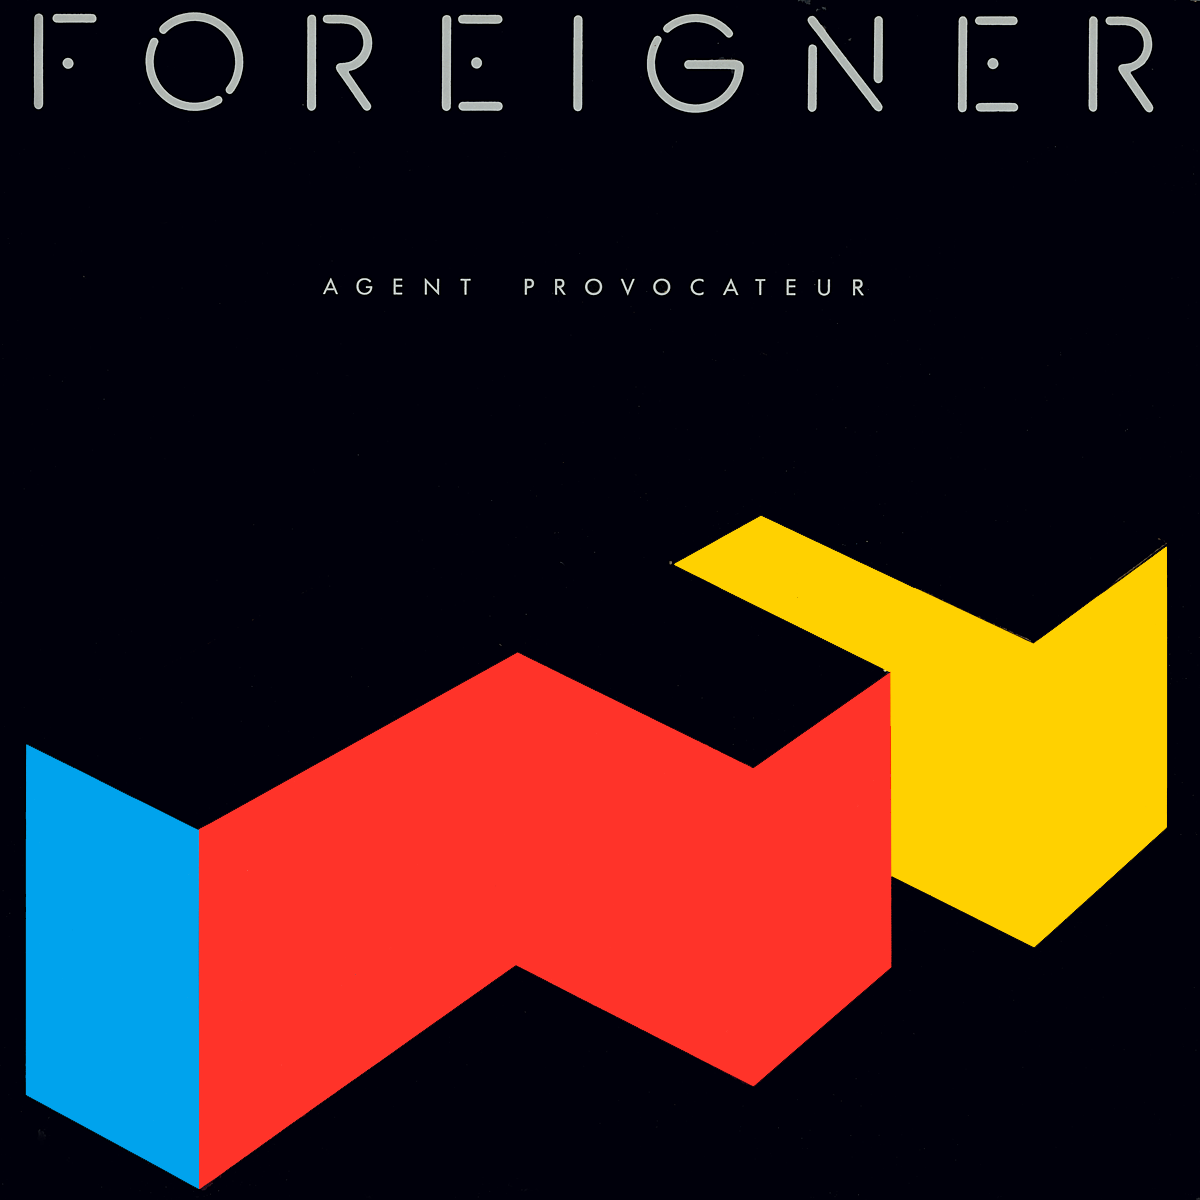 Agent Provocateur by Foreigner